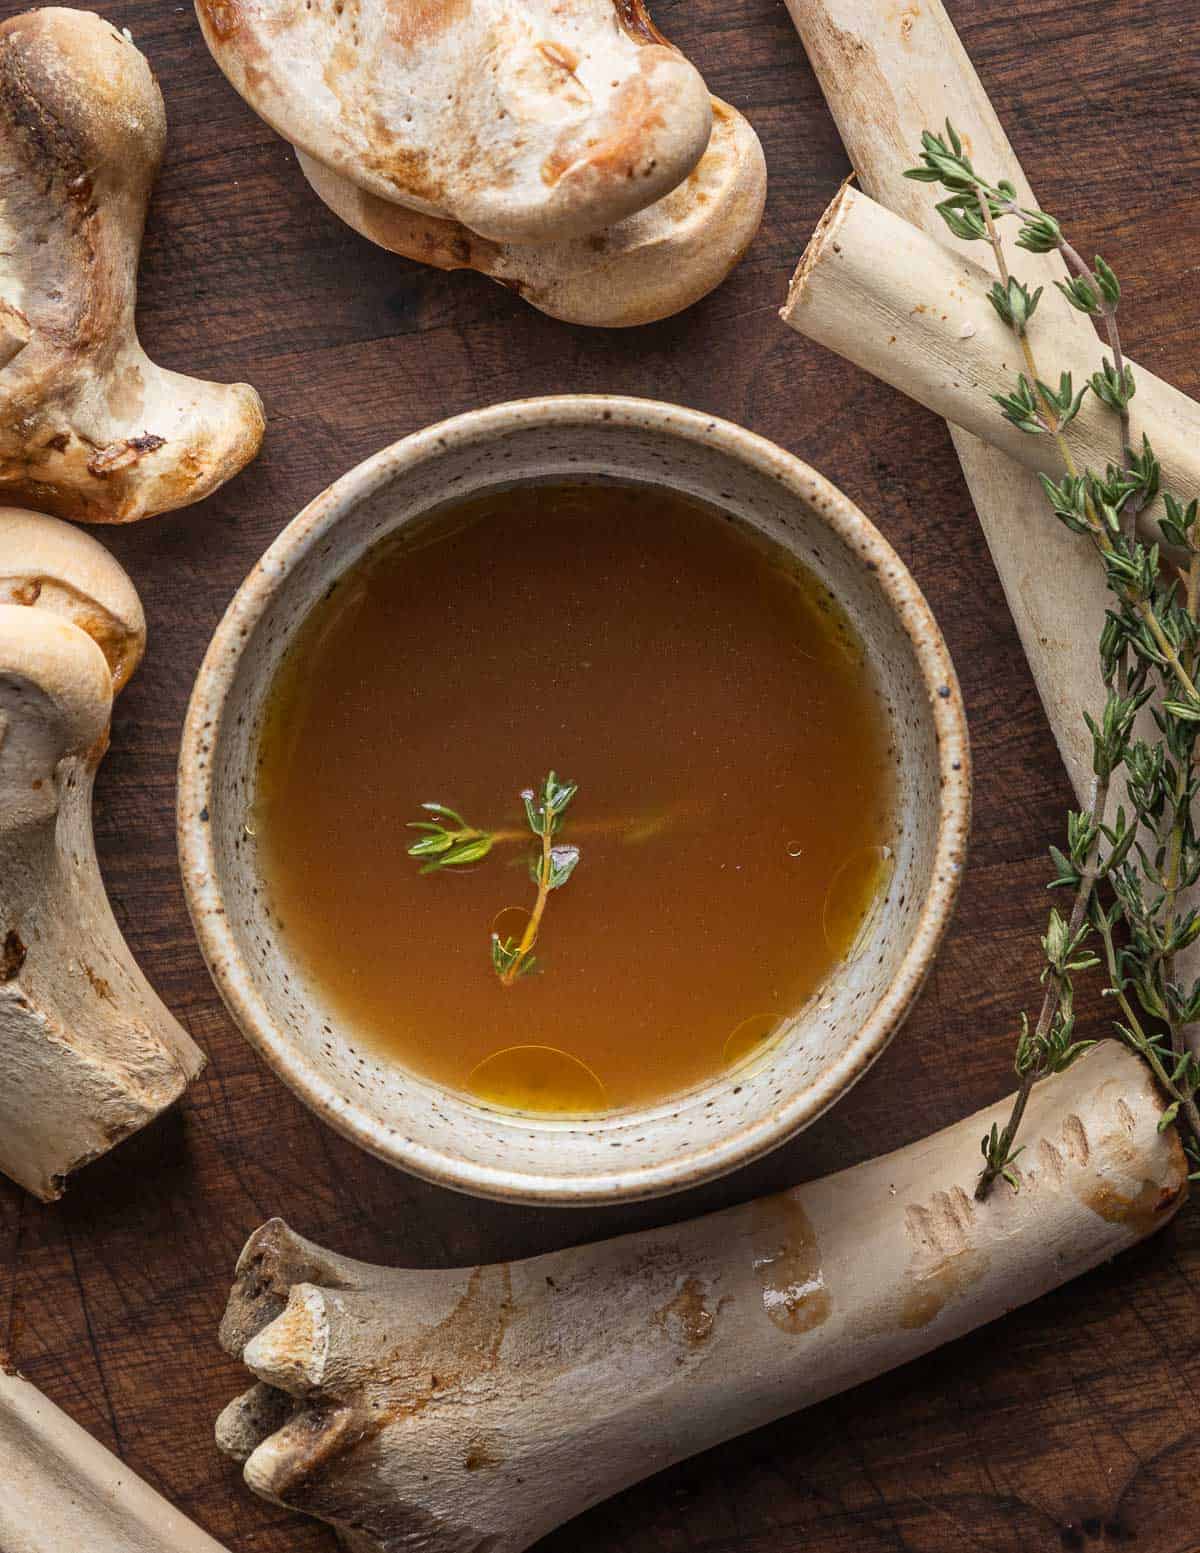 A cup of smoked deer bone broth surrounded by roasted venison bones.